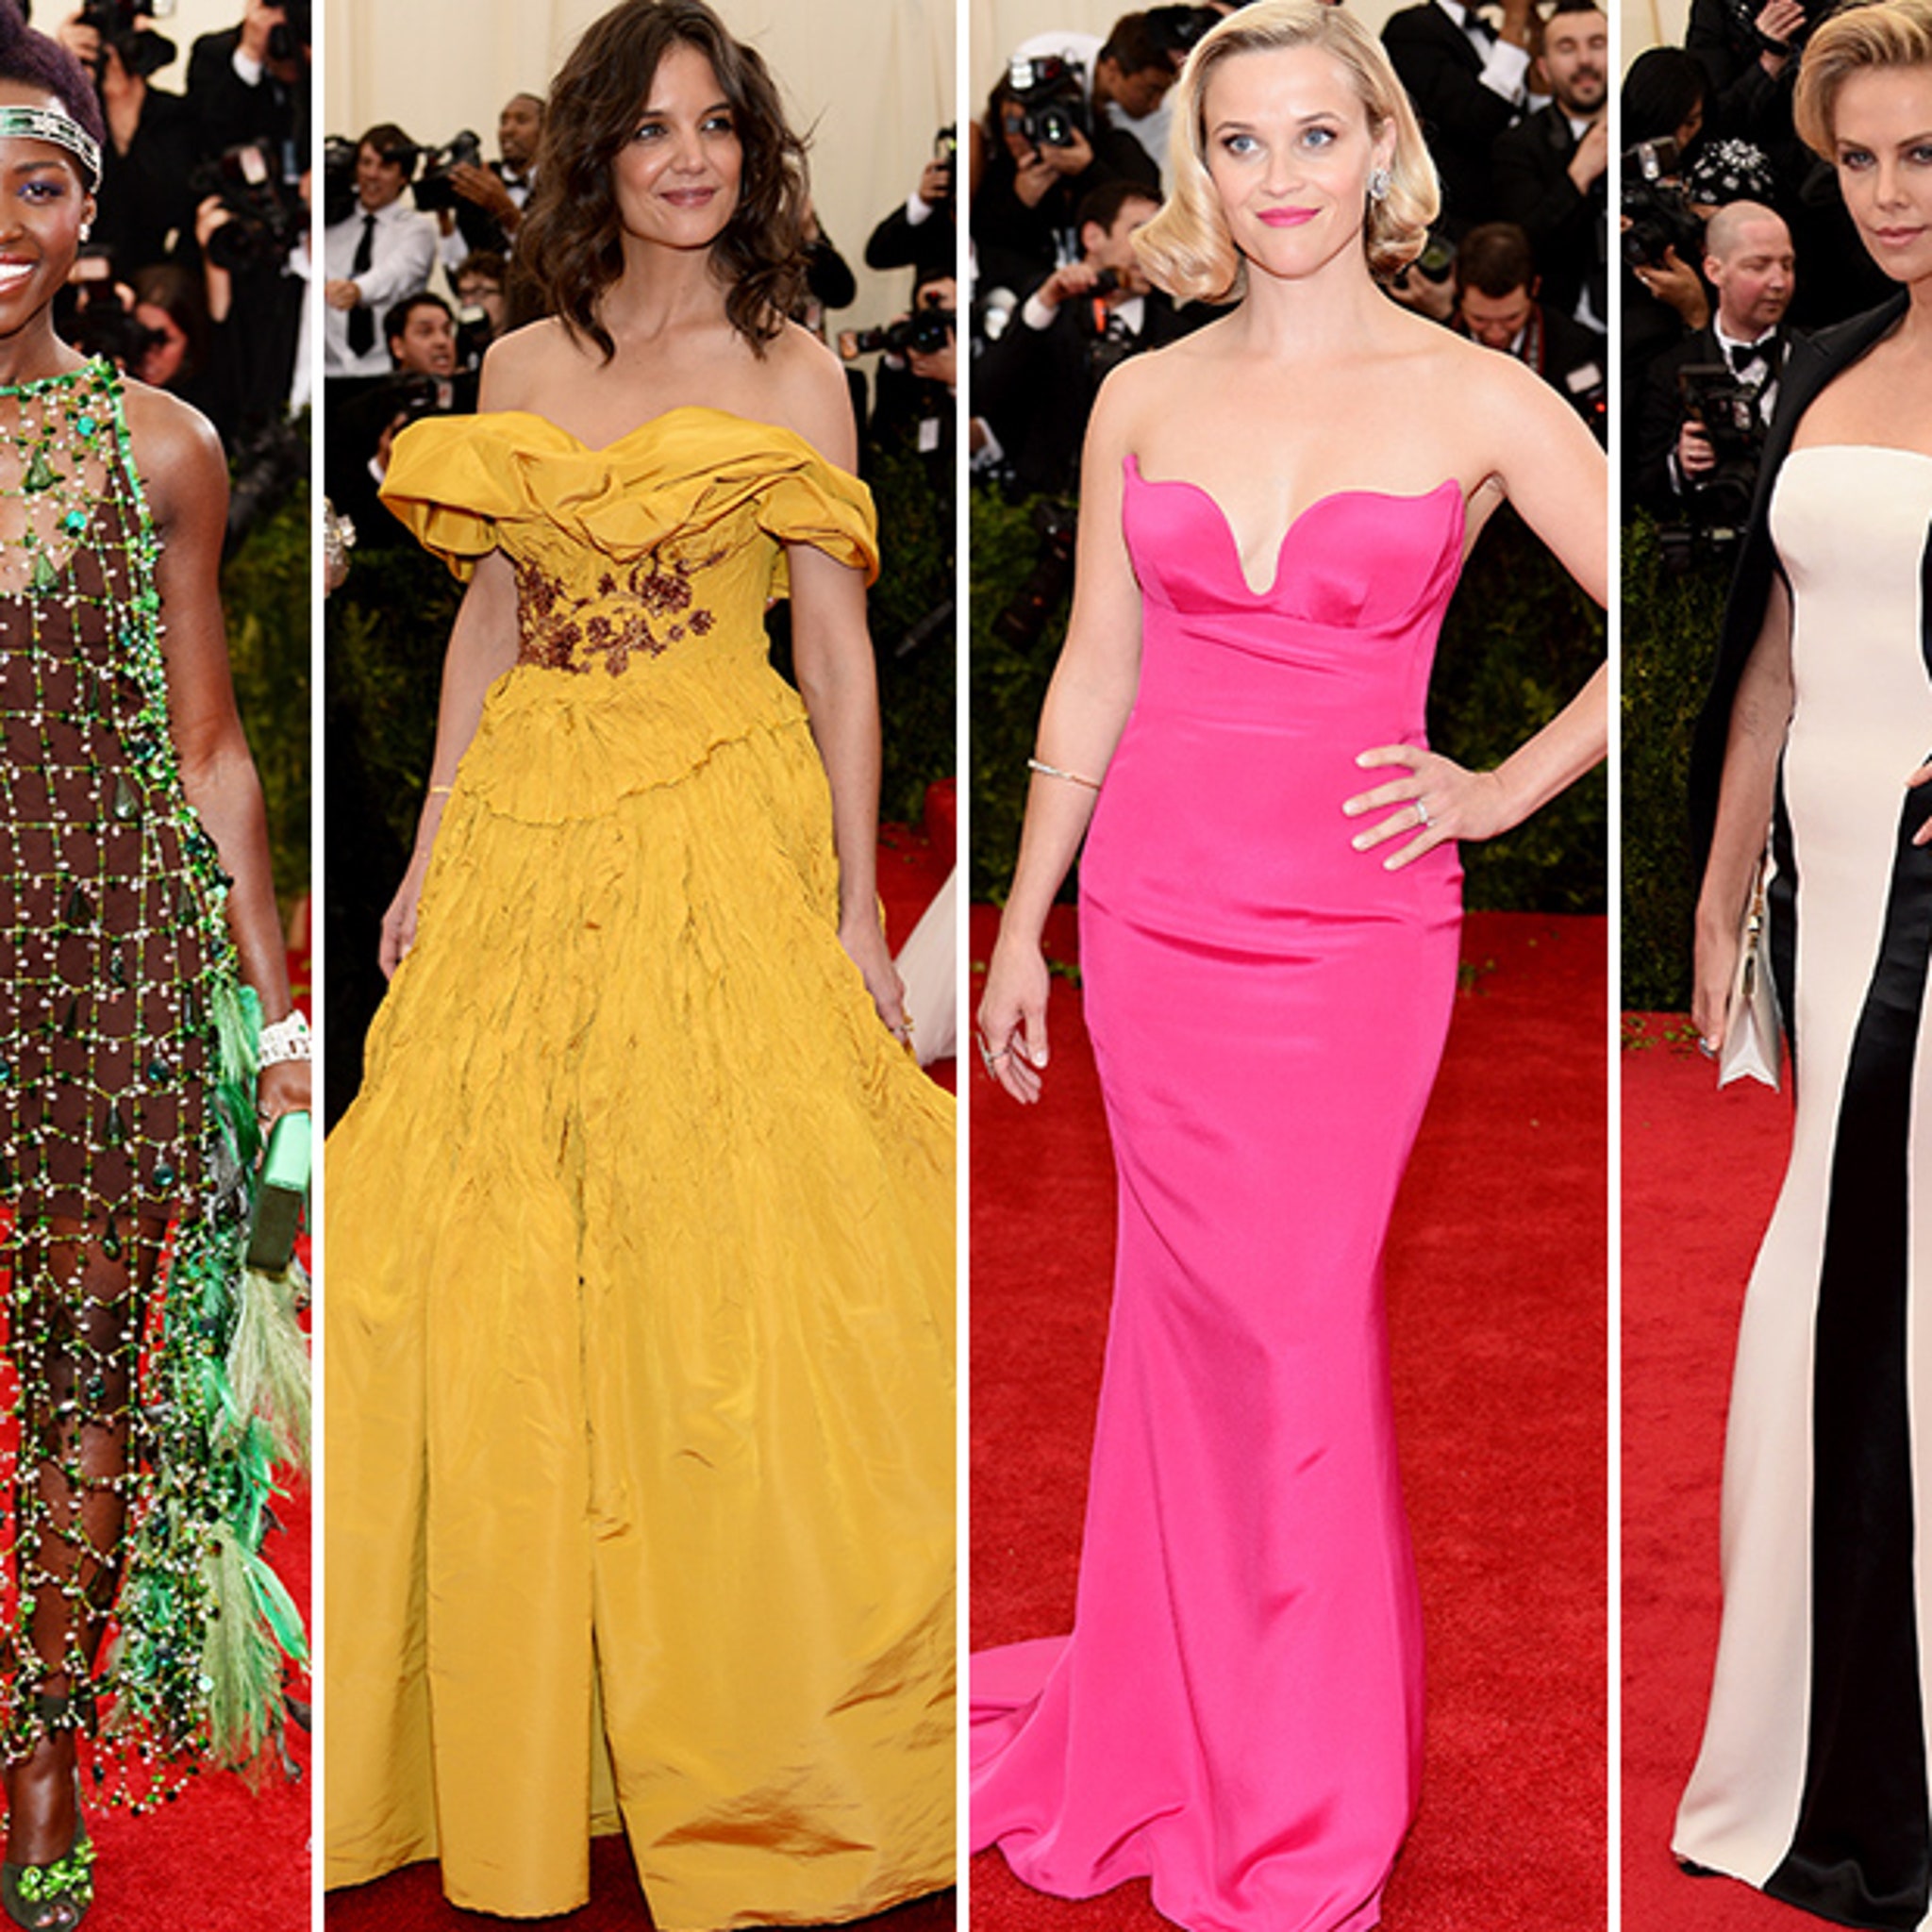 The Best Beauty Looks from the 2014 Met Gala